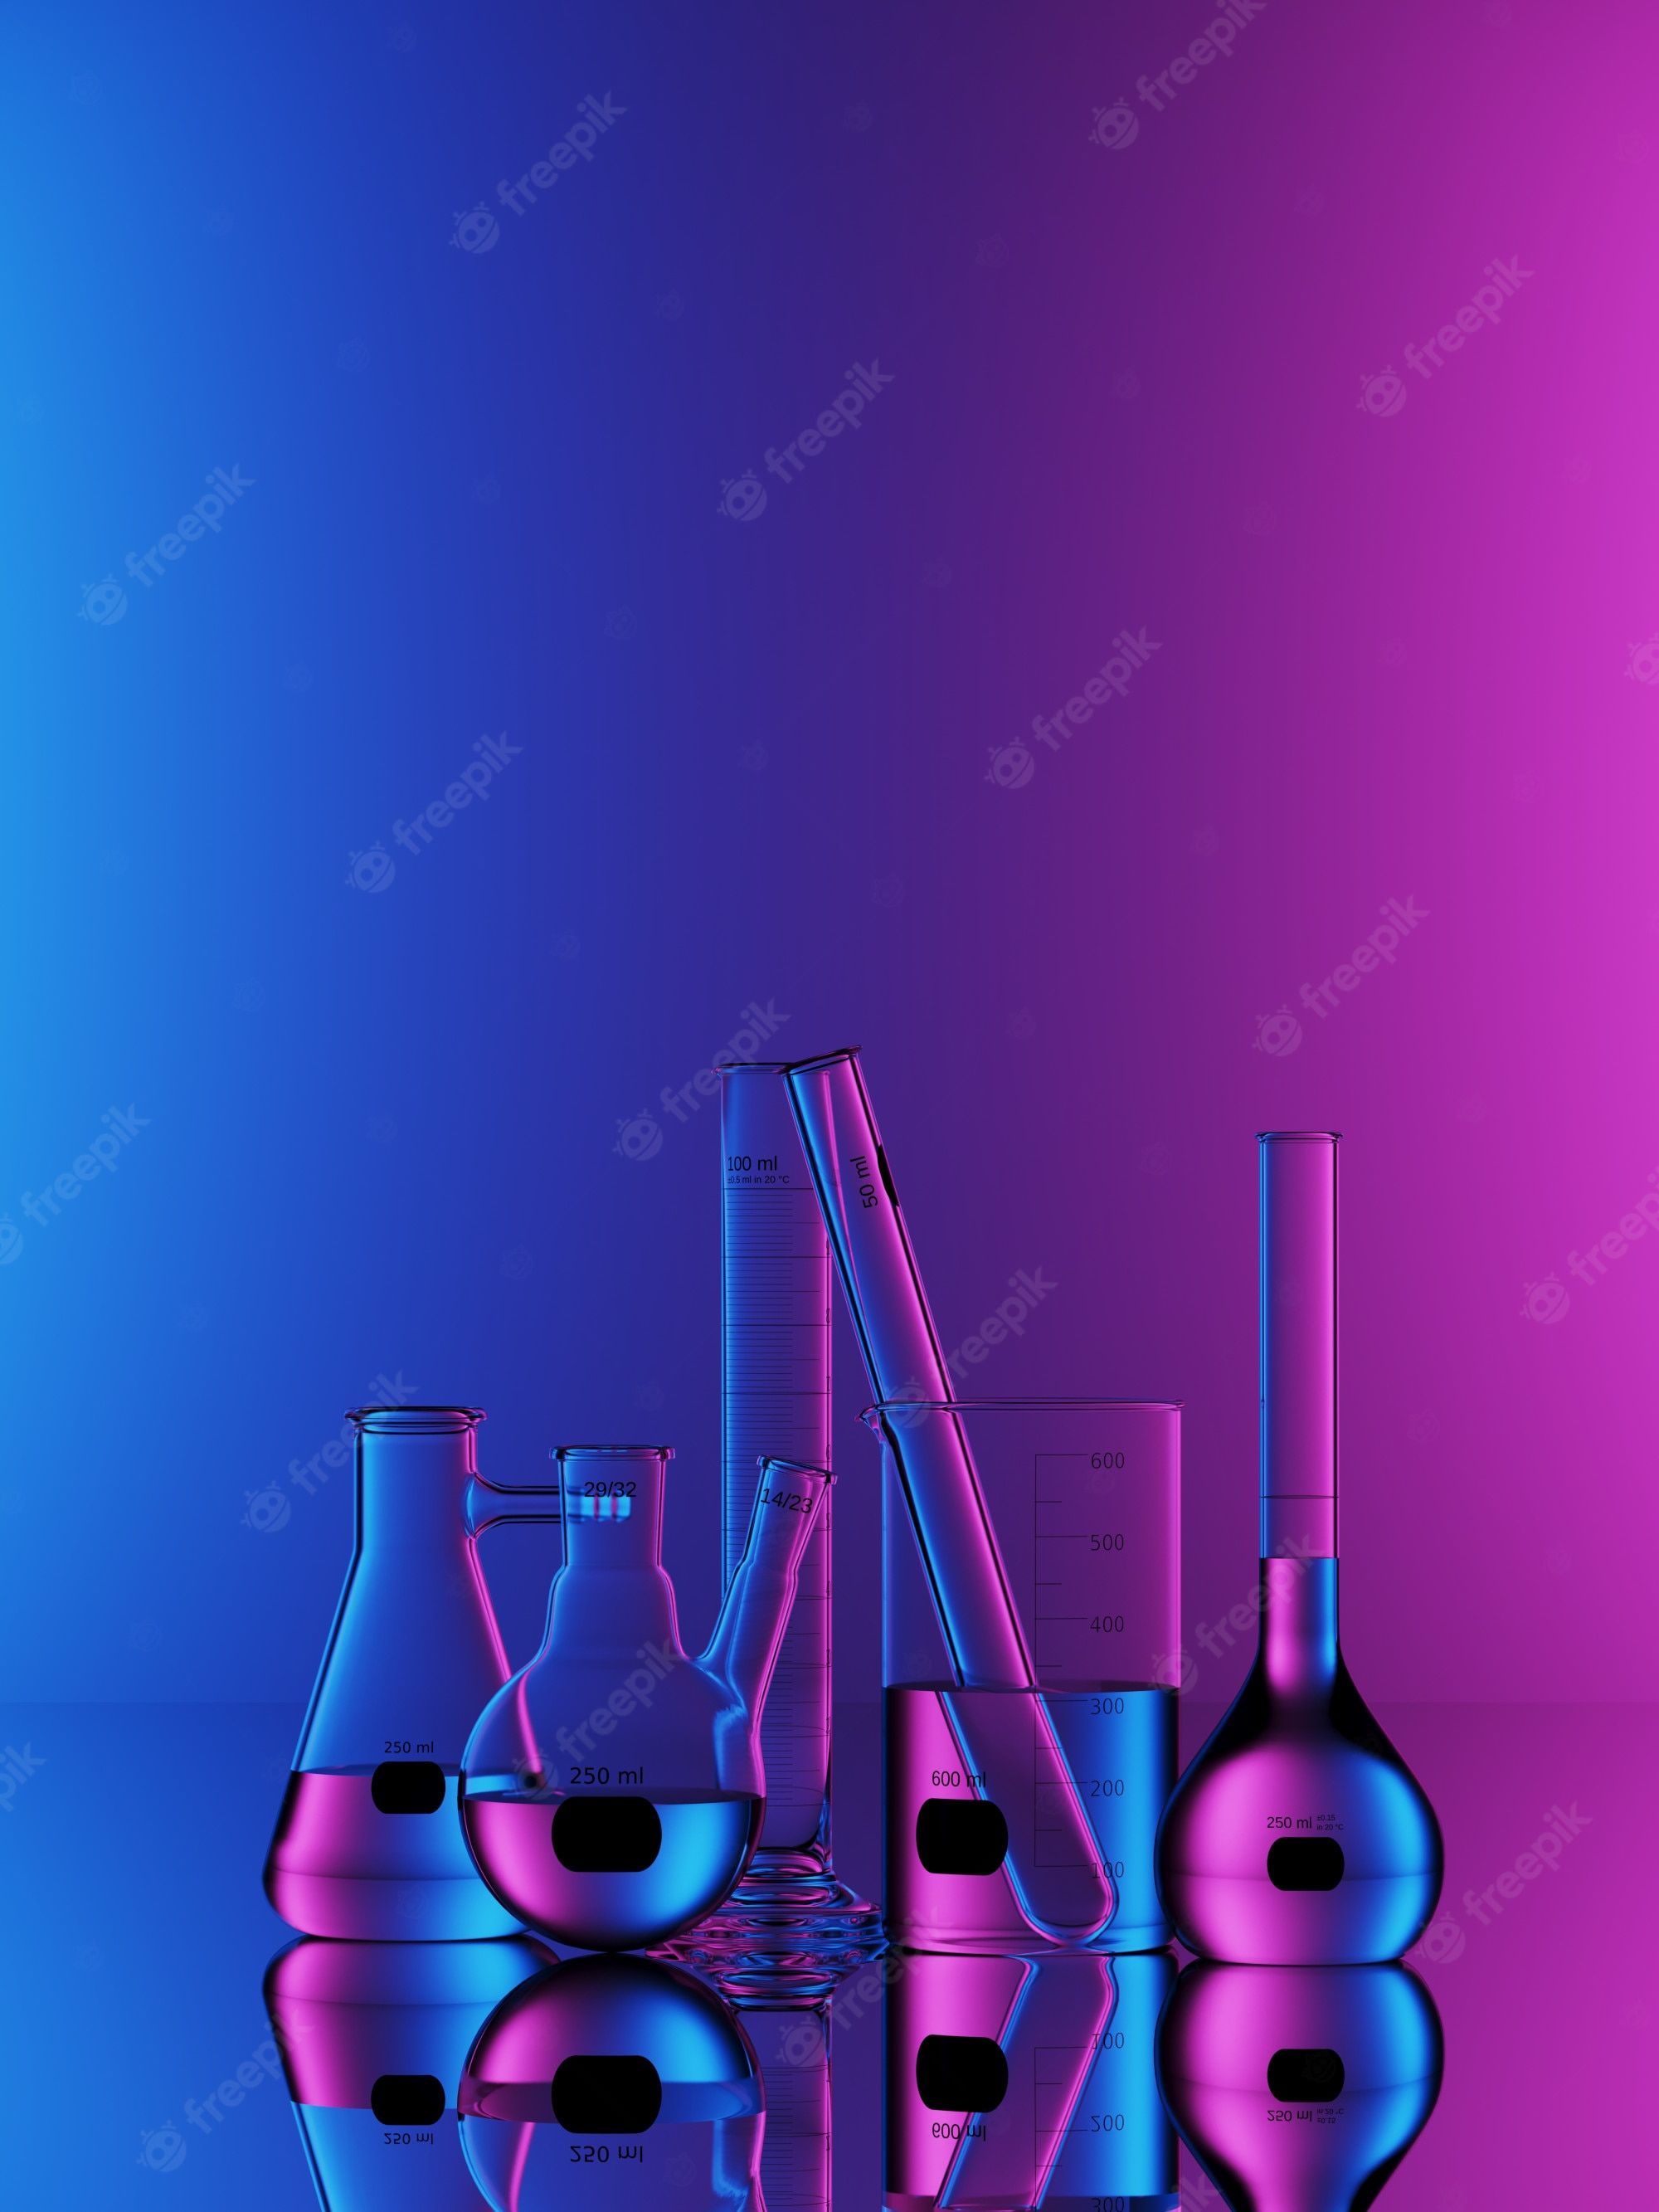 Chemistry Background Picture